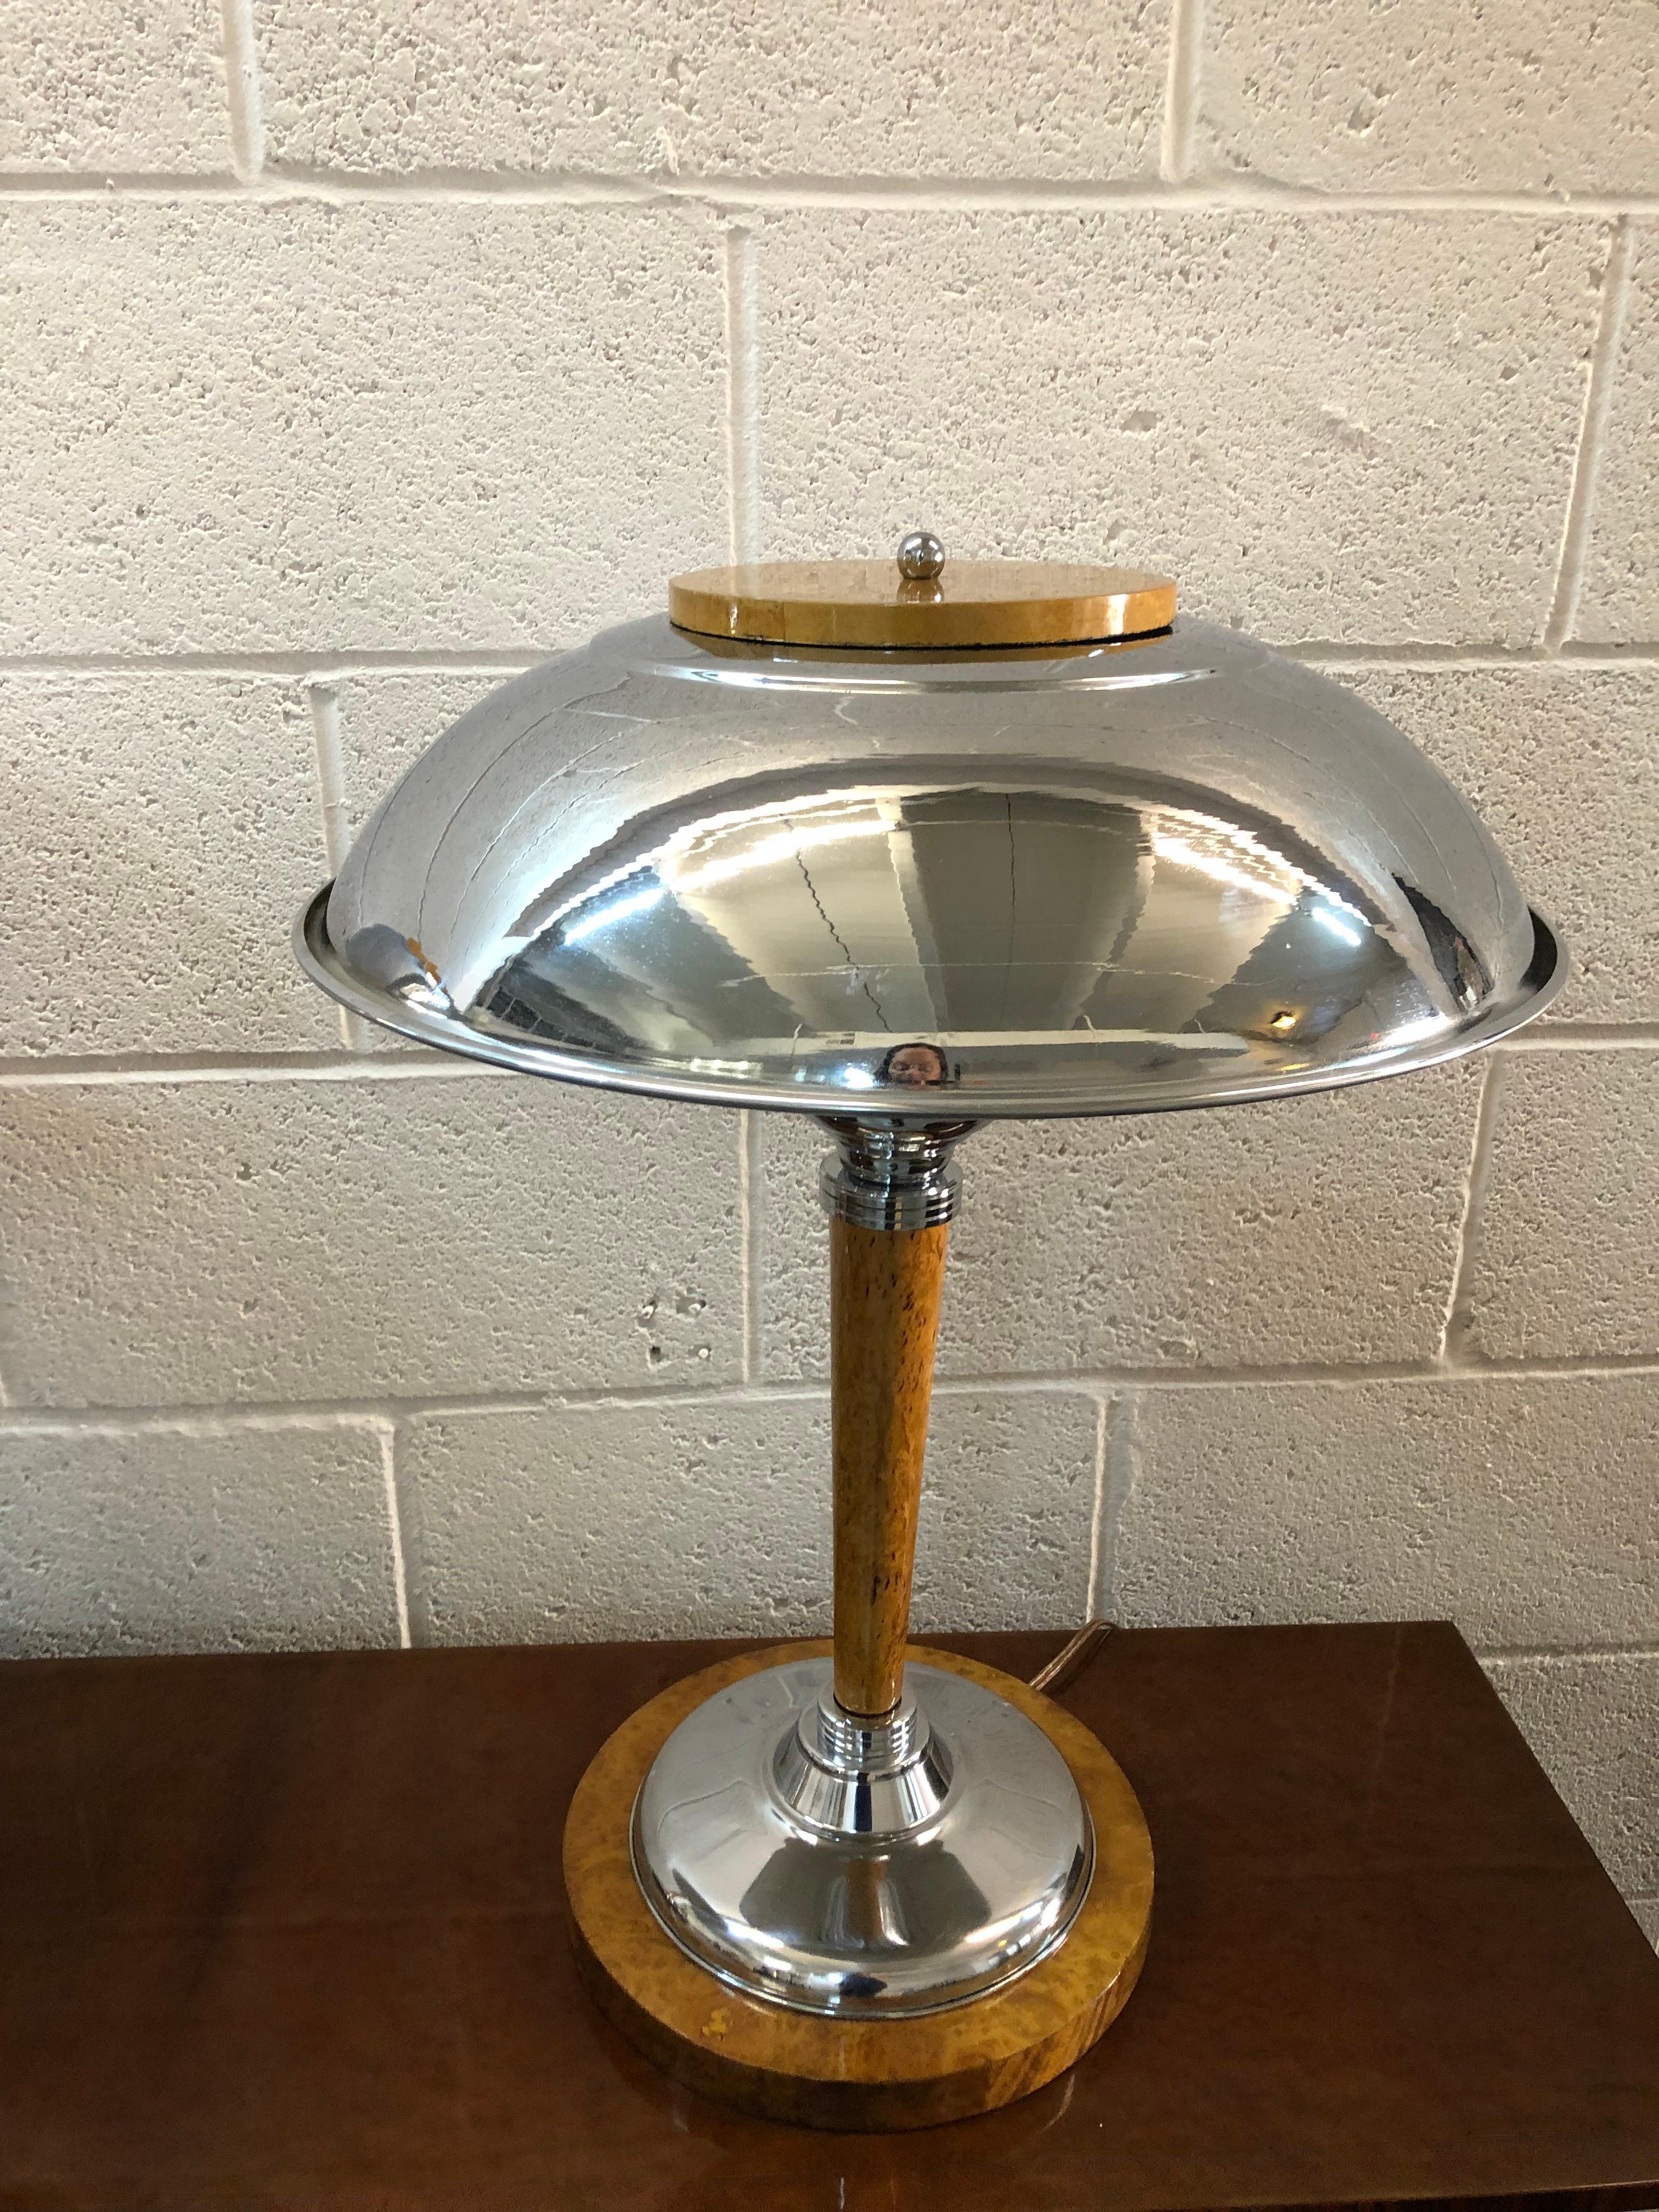 Desk table lamps Art deco.
Exhibited at Original antique show ( Miami beach ) and Palm beach 